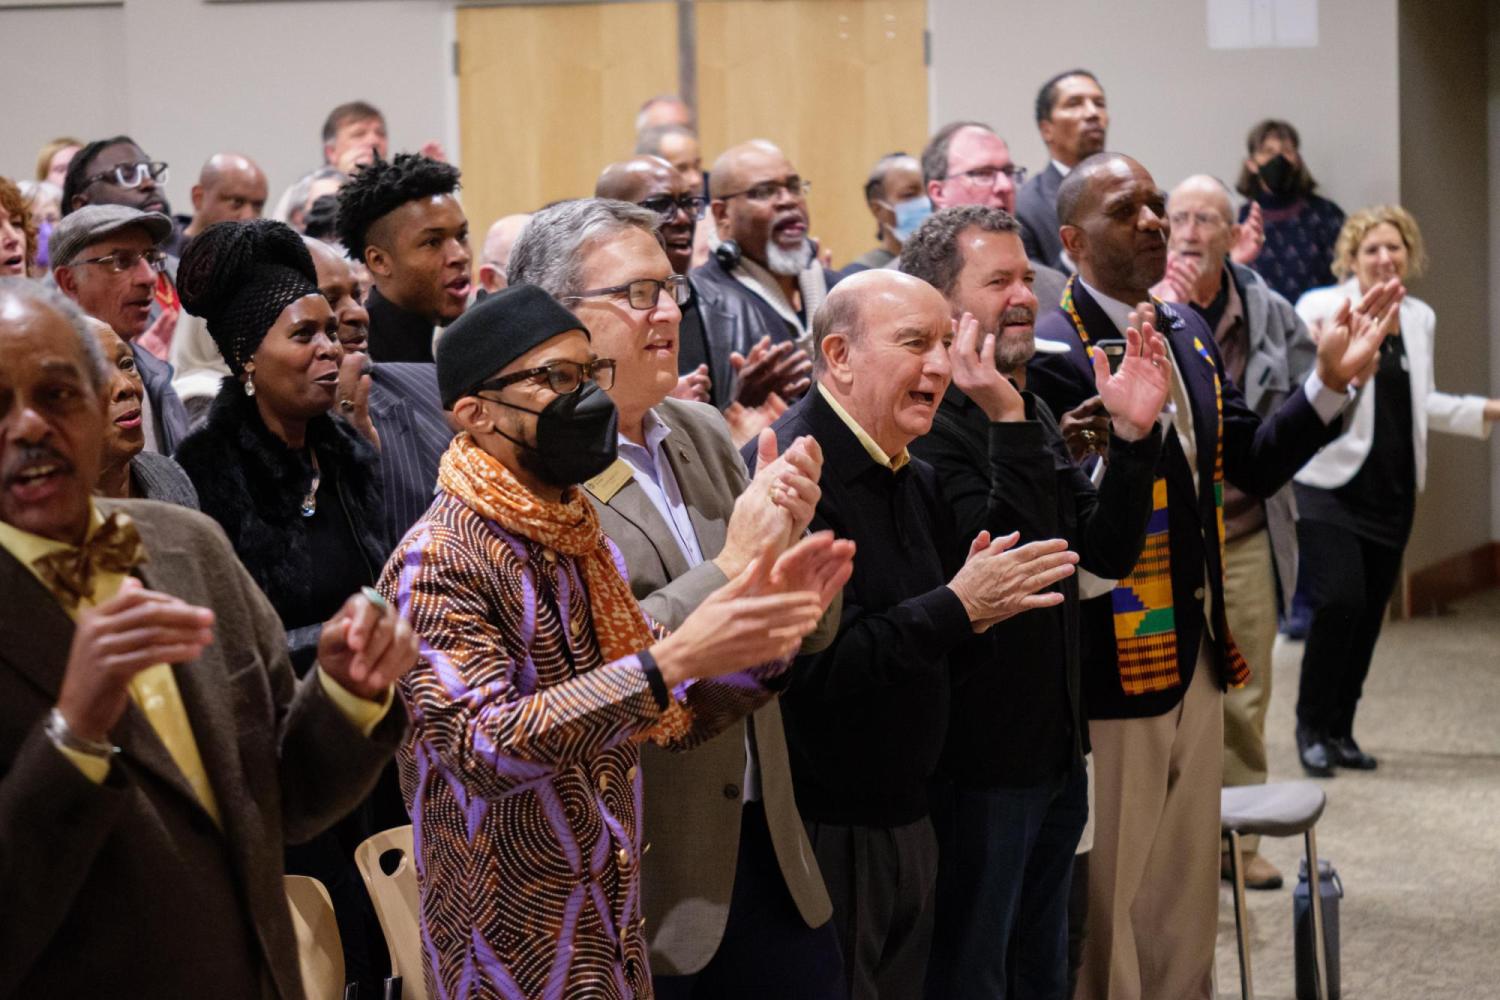 An audience, including CU Boulder affiliates, engages in an MLK Day program at the Jewish Community Center. (Glenn Asakawa/University of Colorado)